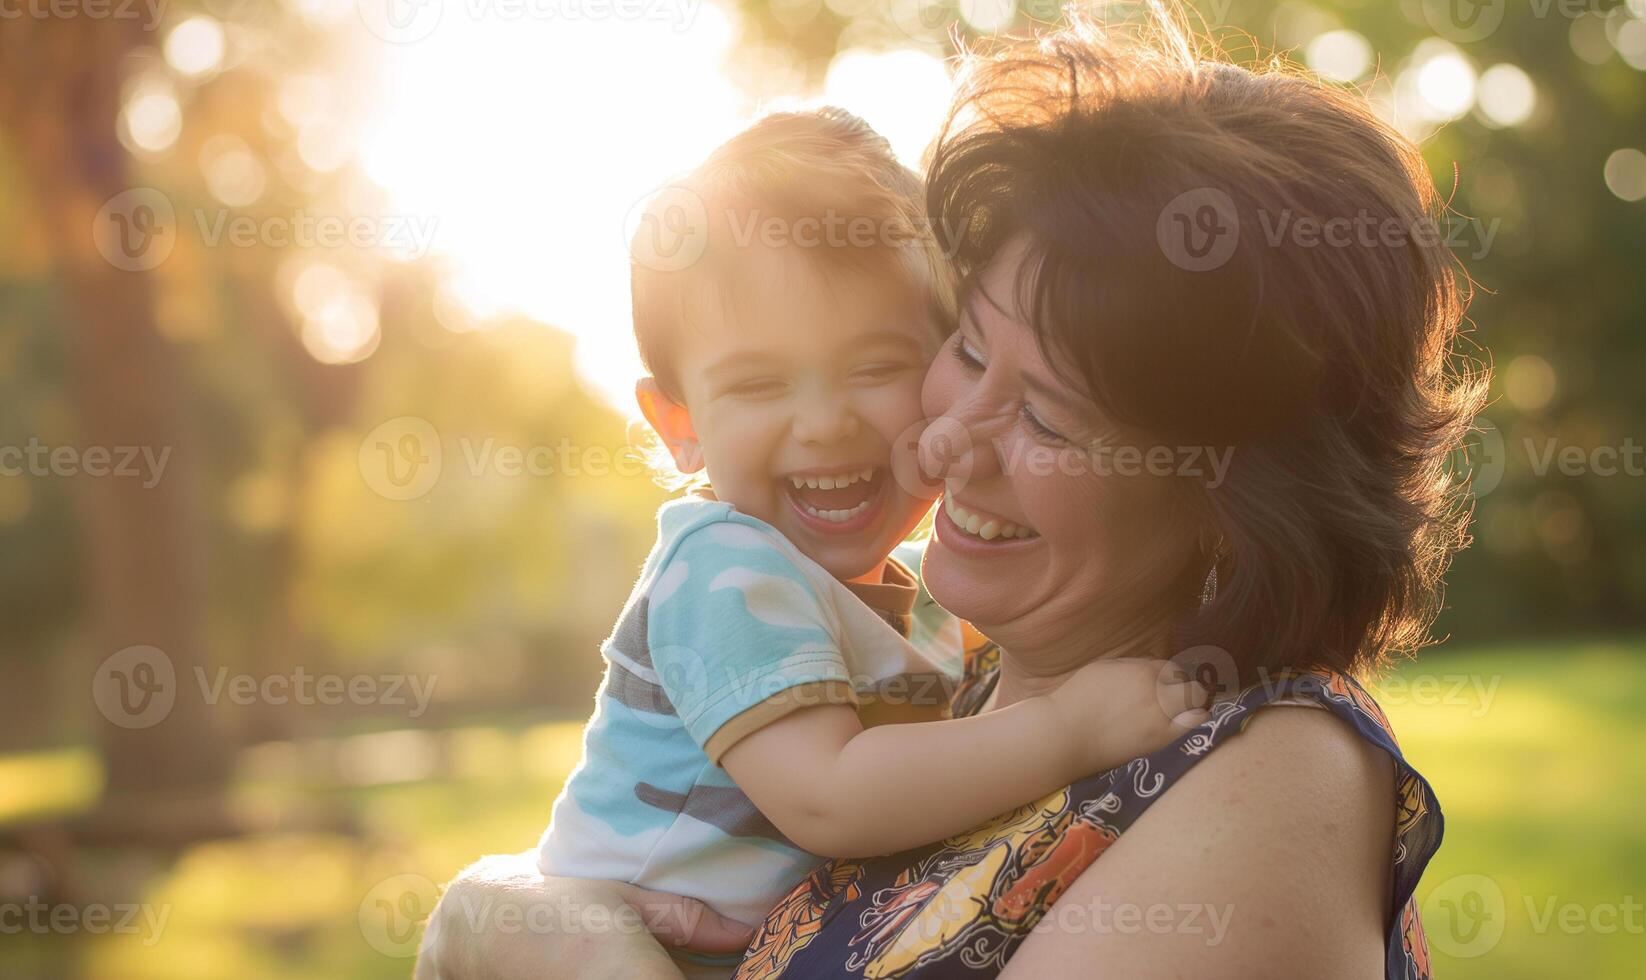 Joyful Embrace Mother and Son Laughing Together in Sunlit Park photo